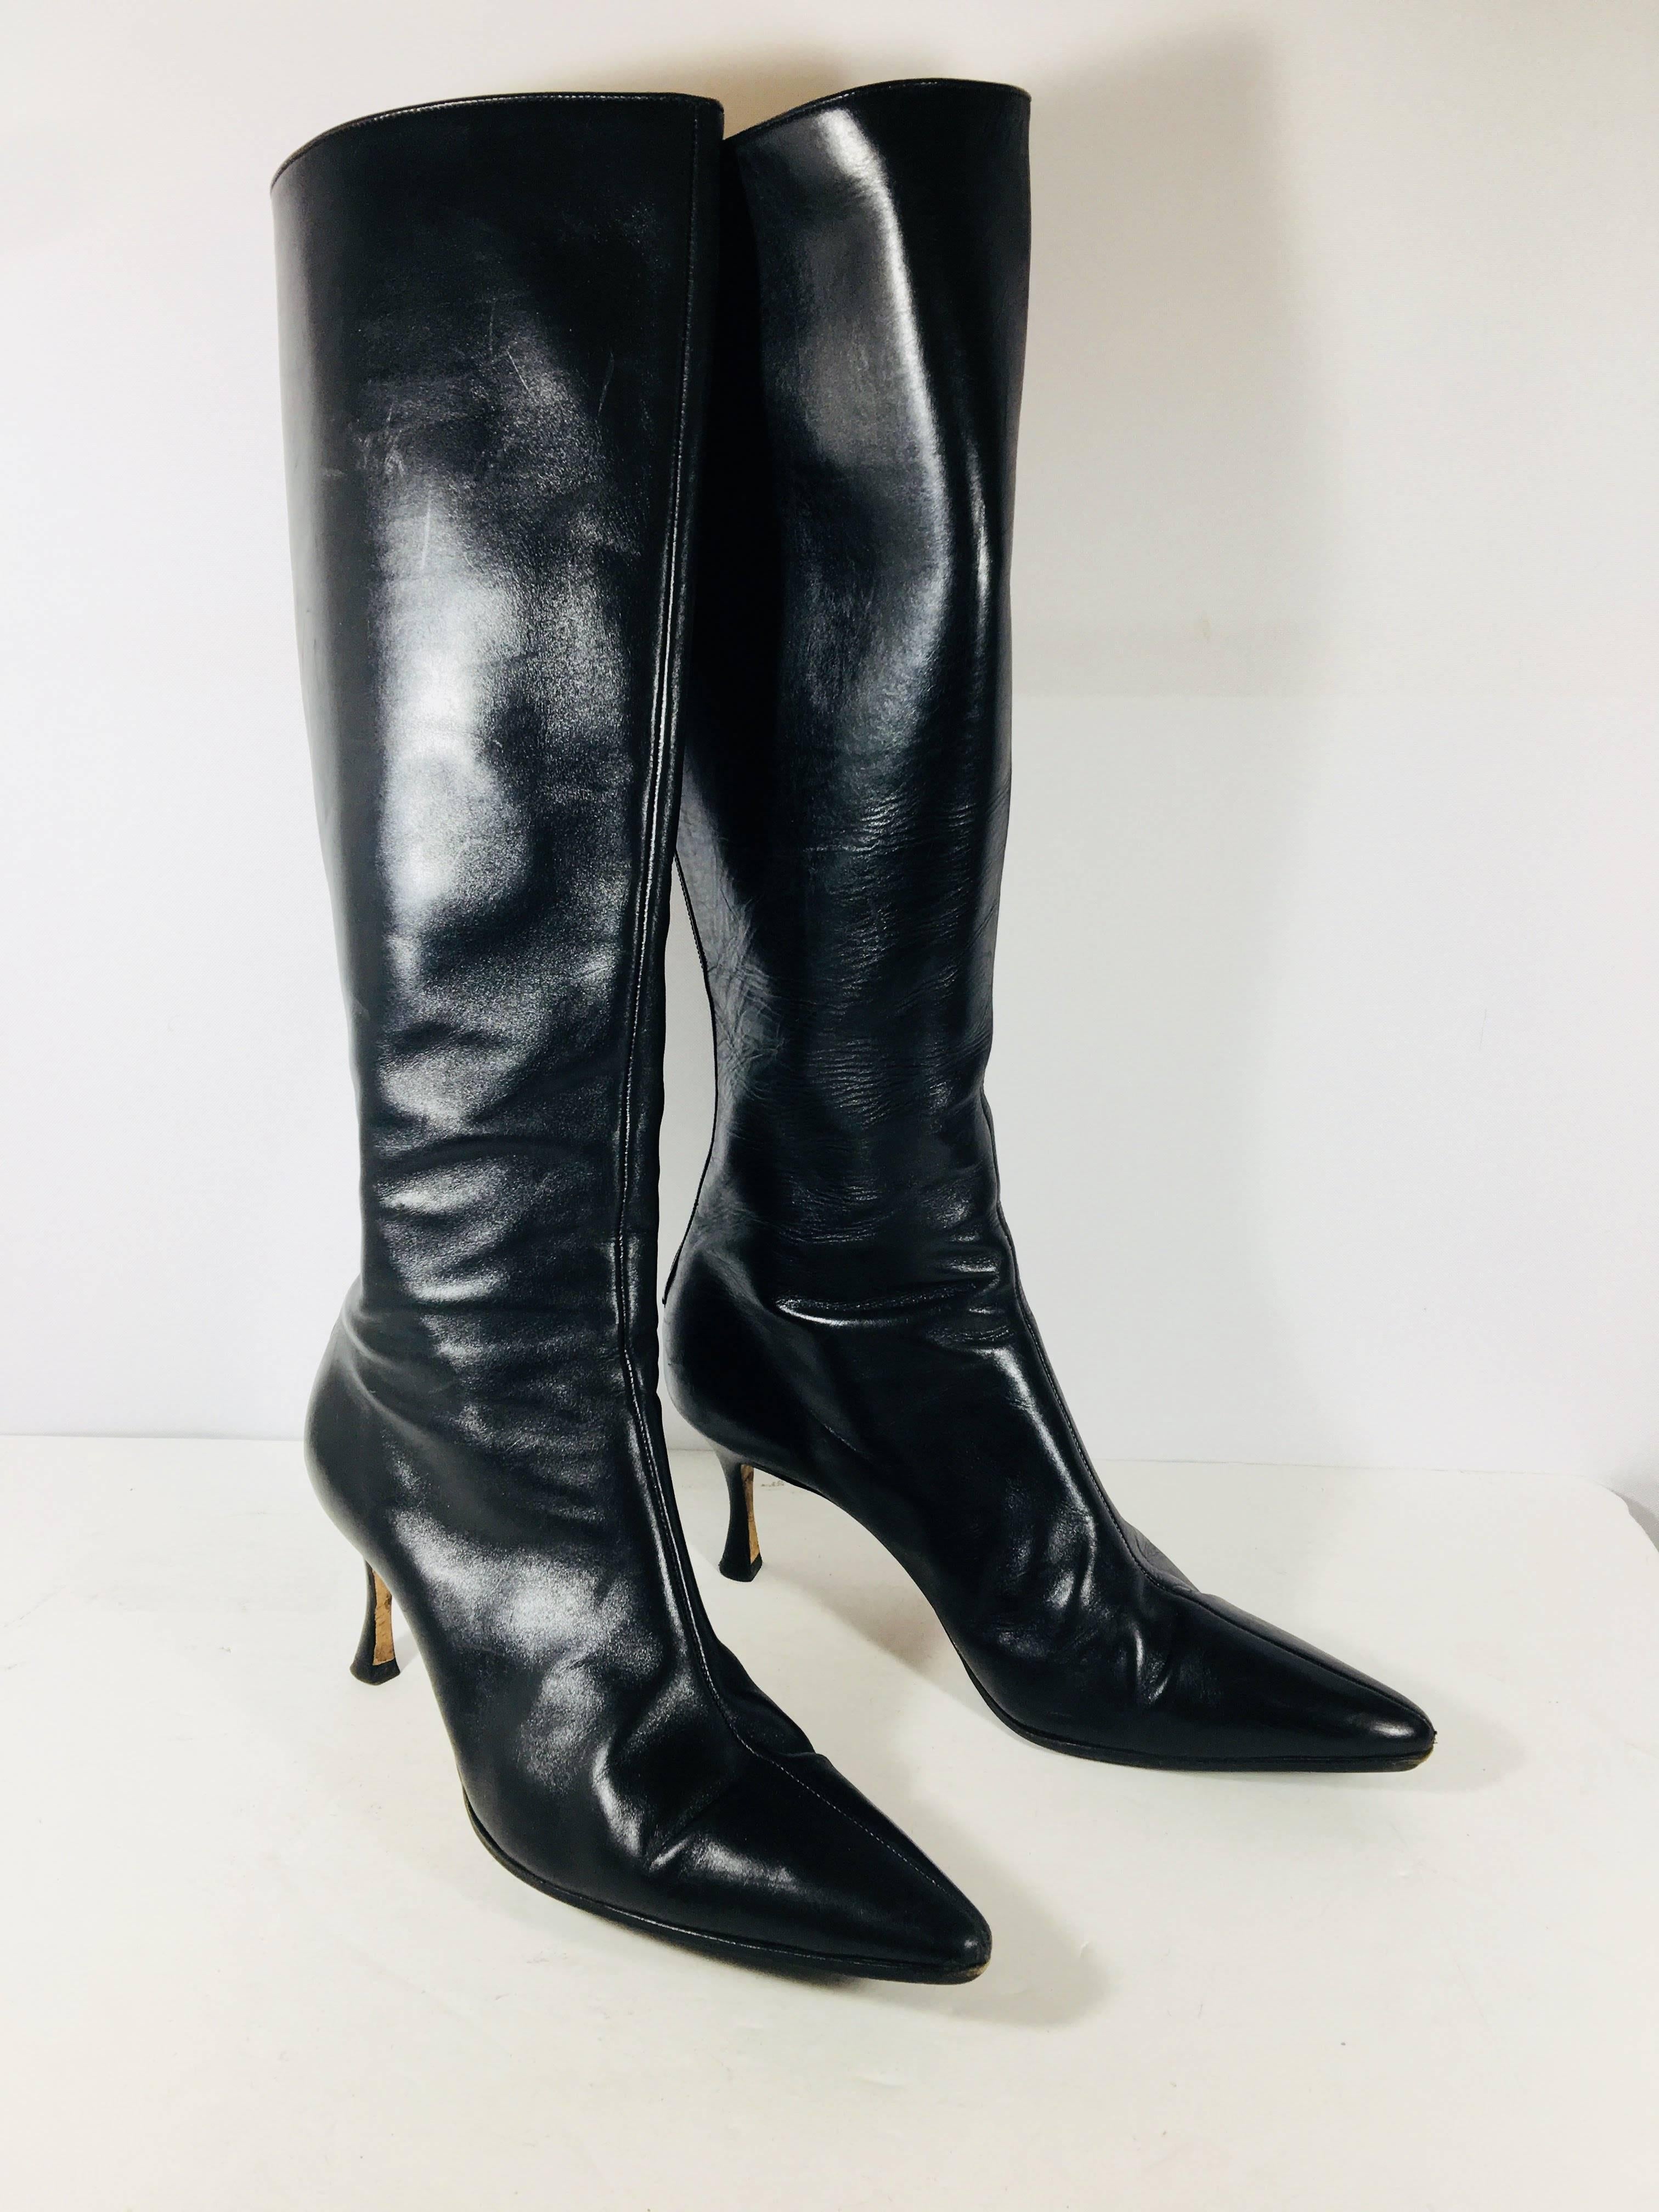 Manolo Blahnik Black Leather Knee High Boots with Pointed Toe, Zipper up Back, and Low Heel.